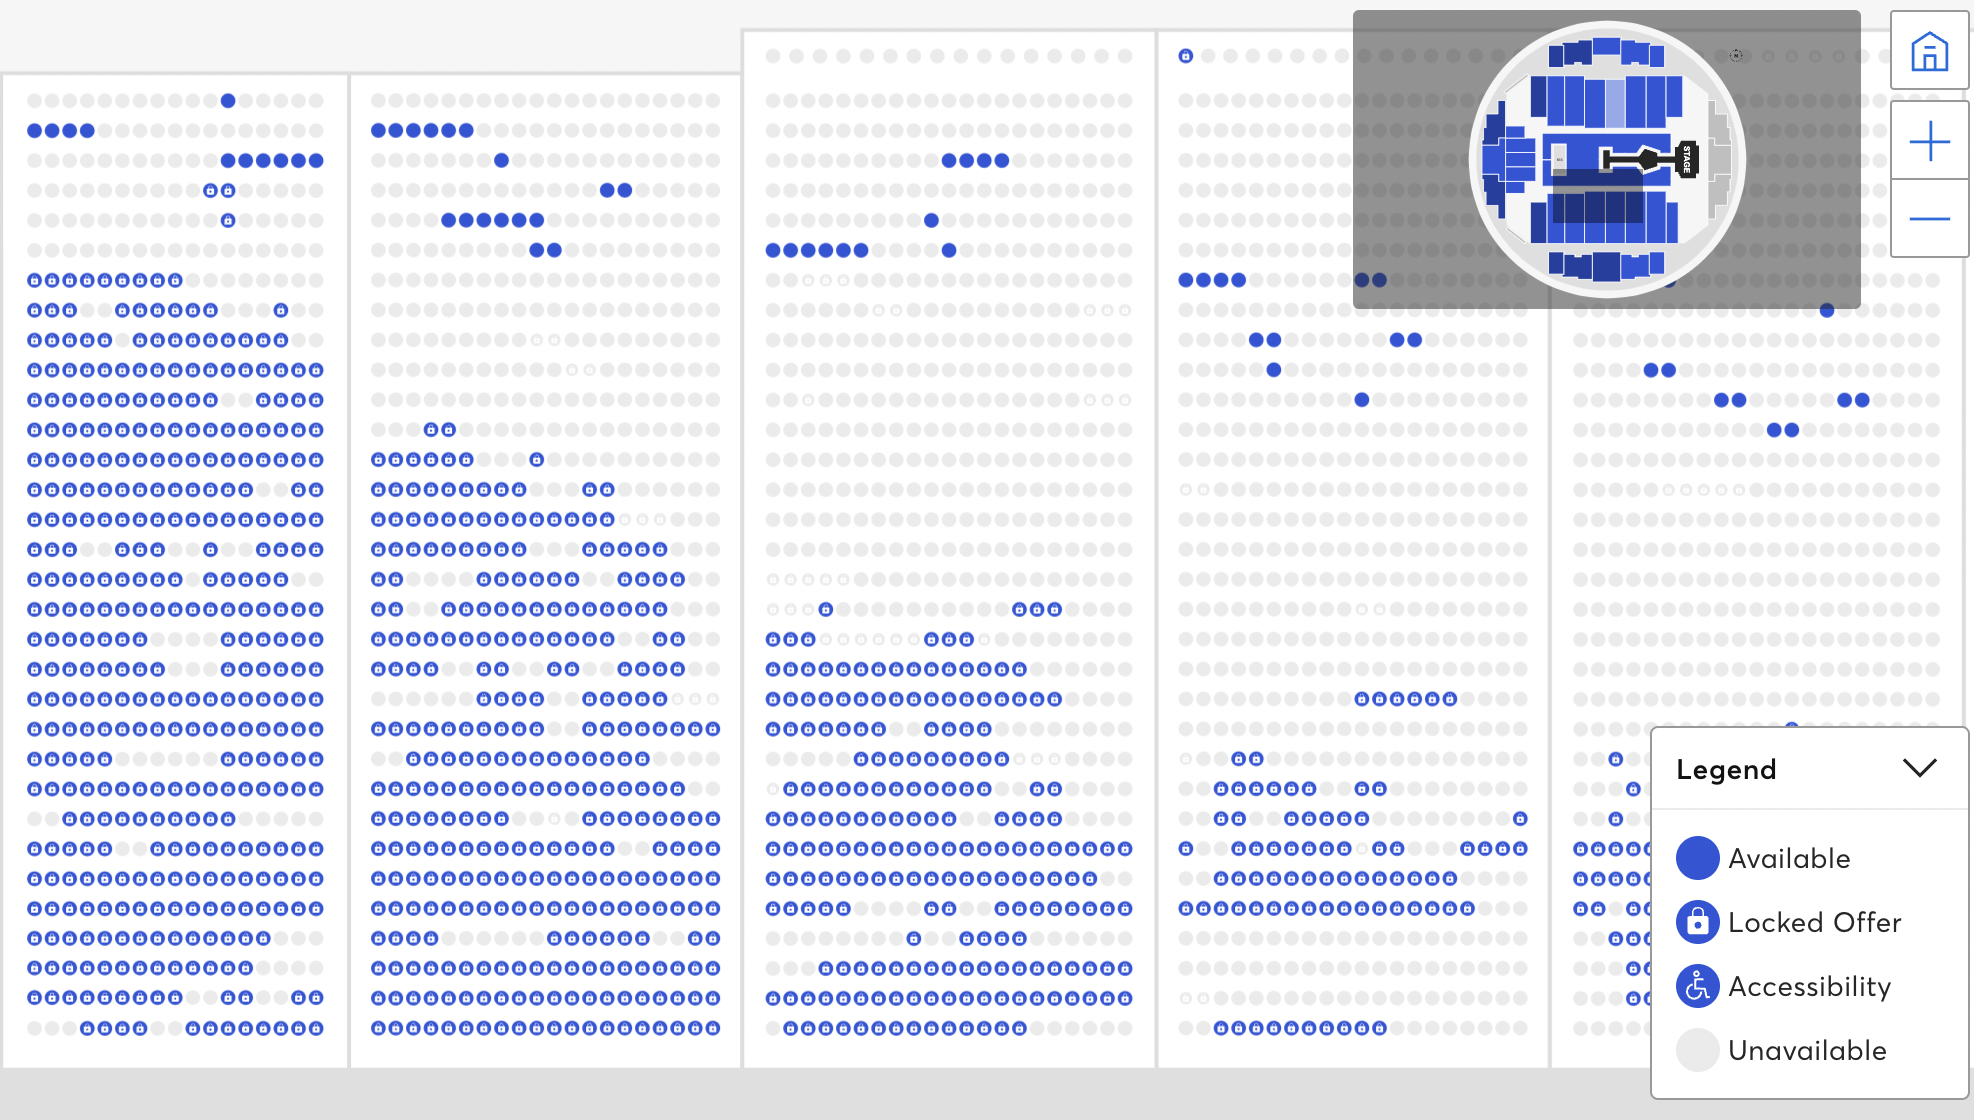 The plain dark blue seats can be purchased without a presale code